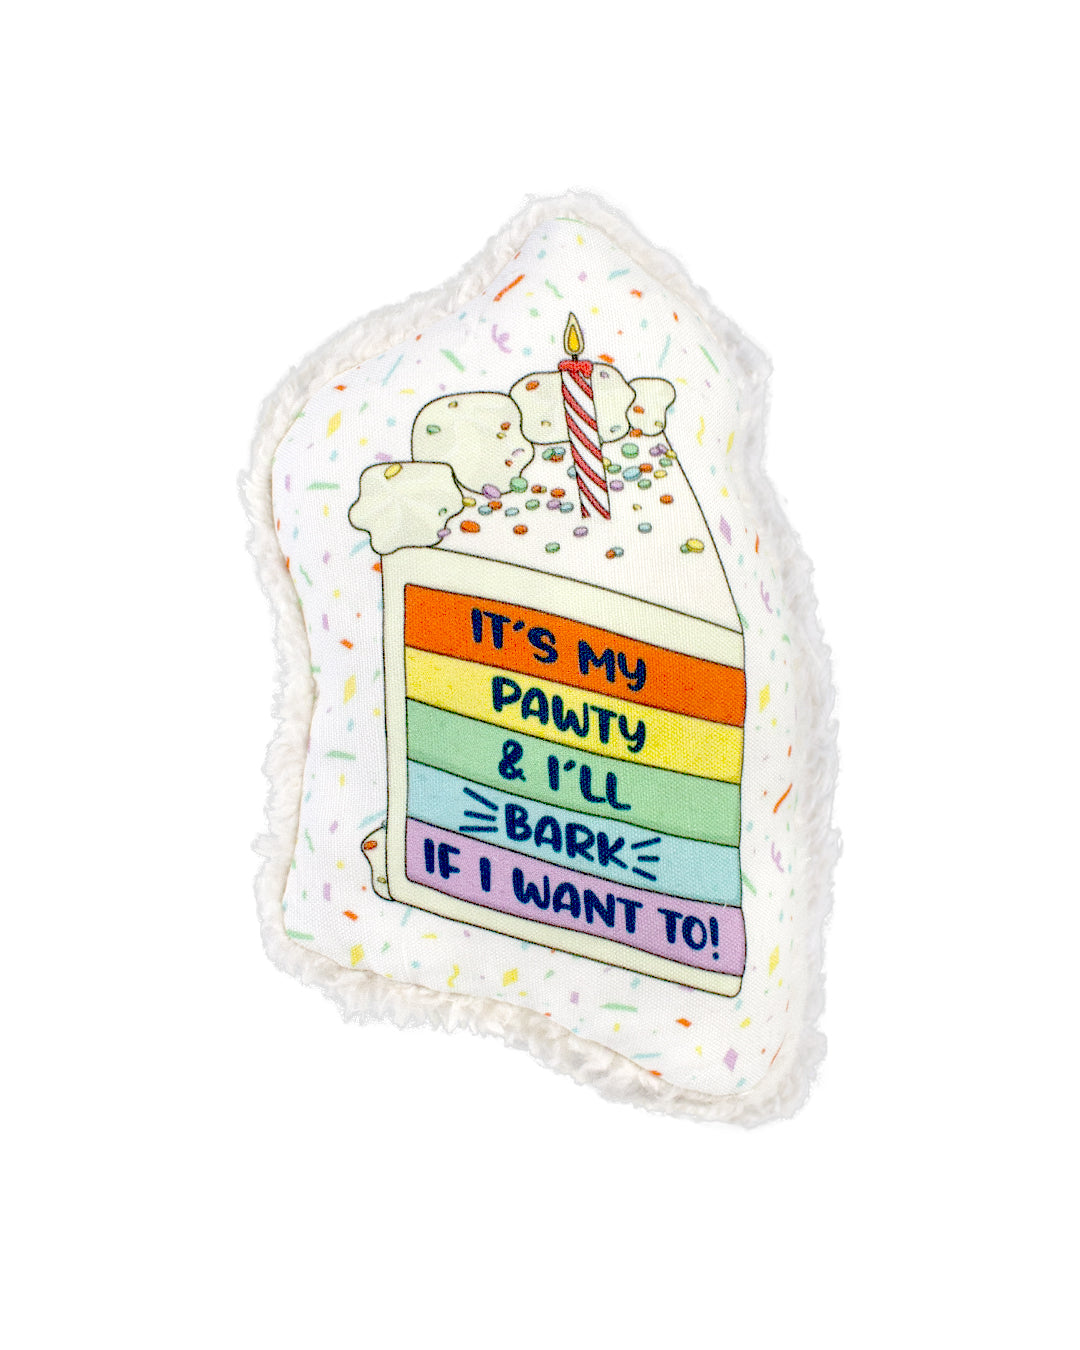 Eco-friendly dog toy shaped like a slice of layered rainbow cake with colorful confetti sprinkles. Toy is sustainably made with durable canvas and plush cotton sherpa. All materials are non-toxic and vegan friendly. 